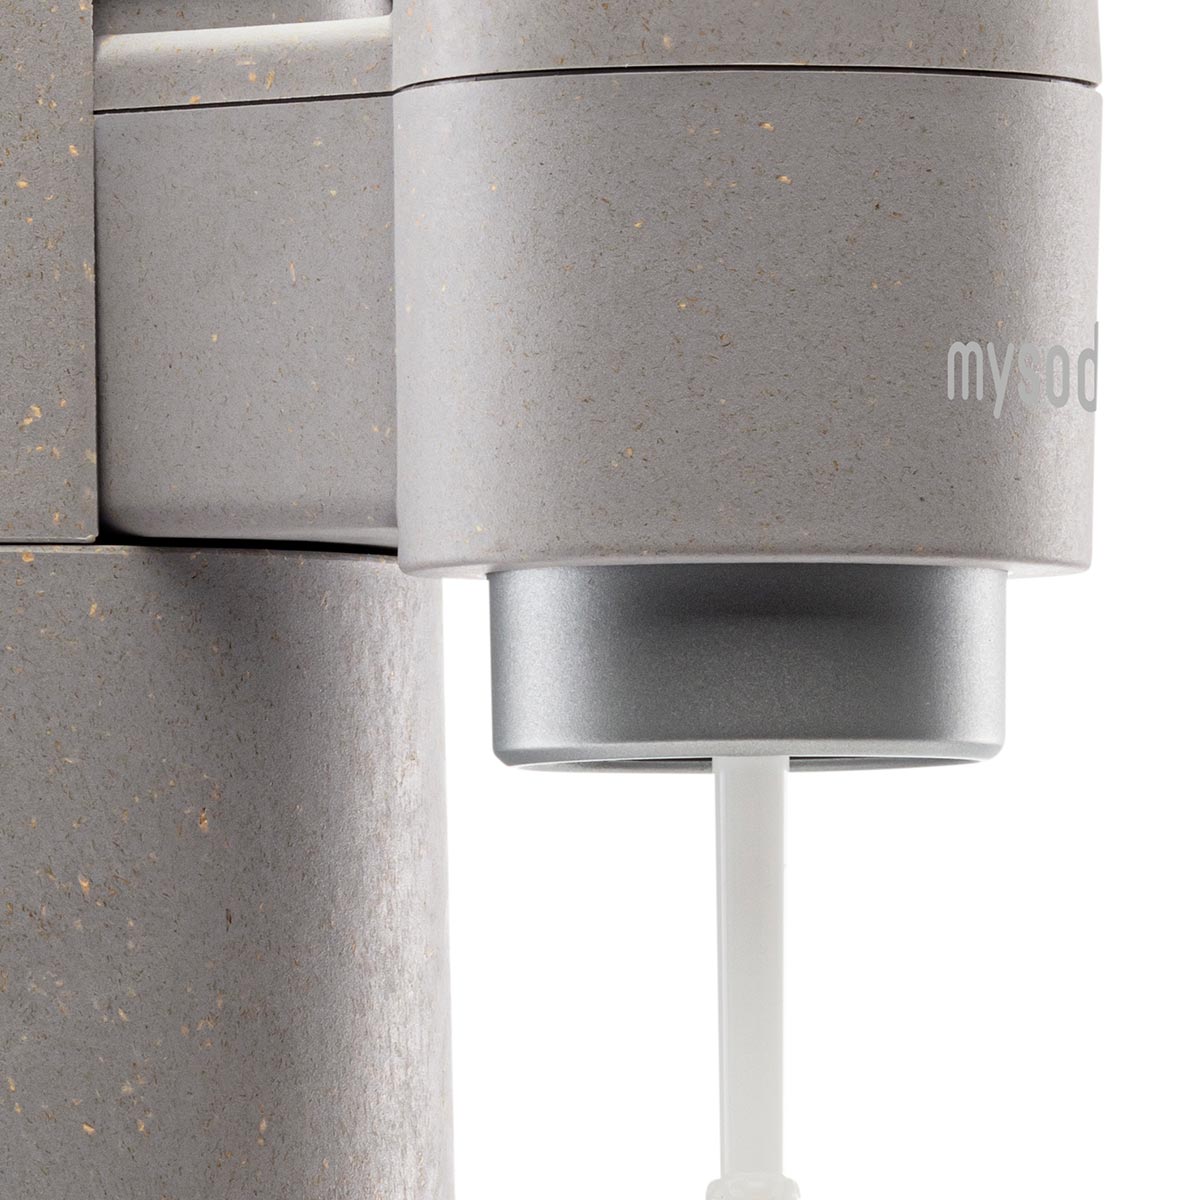 A close-up of dove Mysoda Toby sparkling water maker